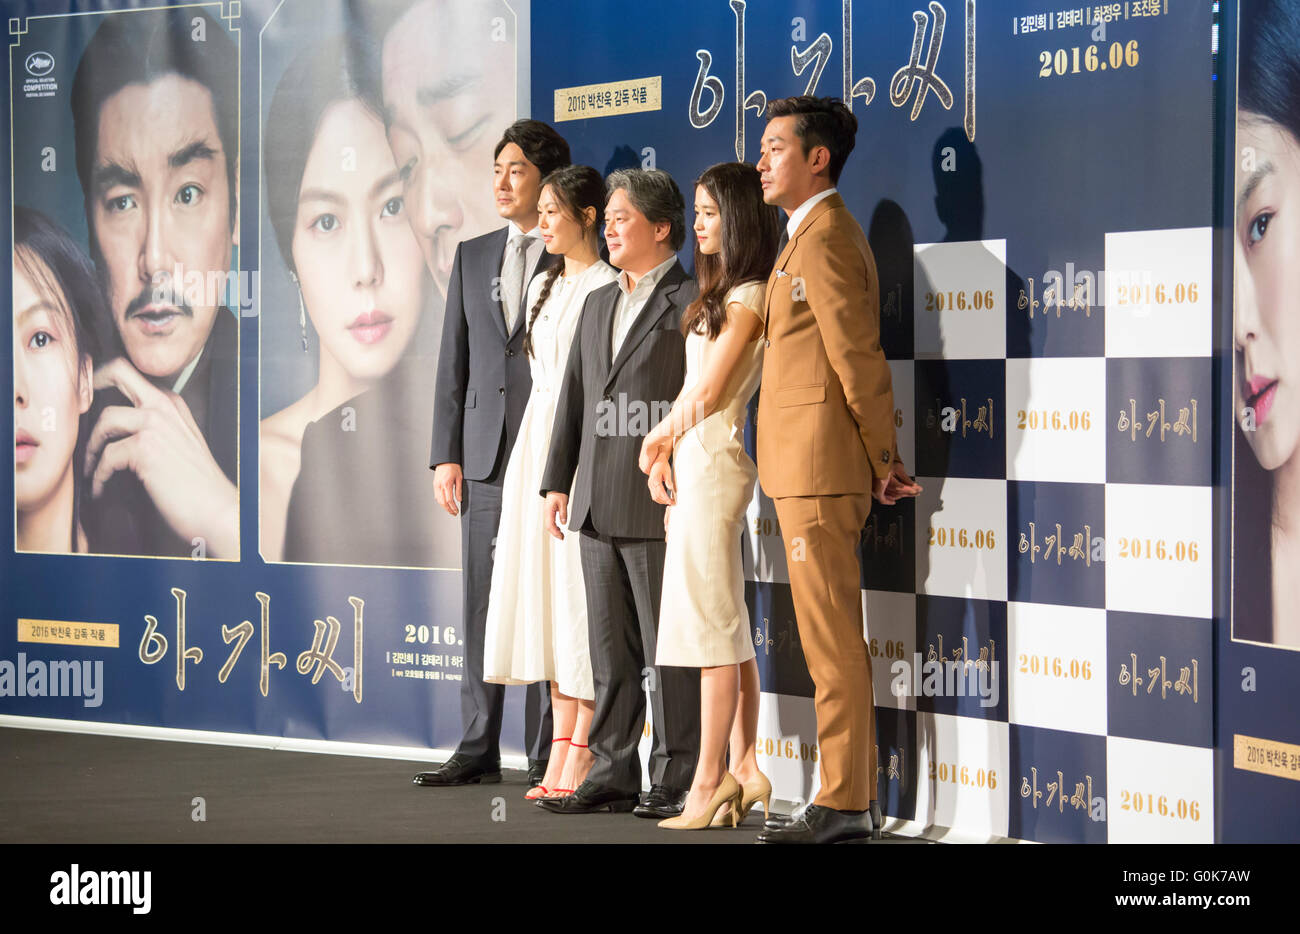 Cho Jin-woong, Kim Min-hee, Kim Tae-ri, Ha Jung-woo and Park Chan-wook, May 2, 2016 : Cast members Cho Jin-woong (L), Kim Min-hee (2nd L), Kim Tae-ri (2nd R) and Ha Jung-woo (R) pose with director Park Chan-wook during a press conference for their film, 'The Handmaiden' in Seoul, South Korea. The thriller was invited for the main competition category of the 69th Cannes Film Festival which will be held in Cannes from May 11-22. The movie was adapted from Sarah Waters' novel Fingersmith. Credit:  Lee Jae-Won/AFLO/Alamy Live News Stock Photo